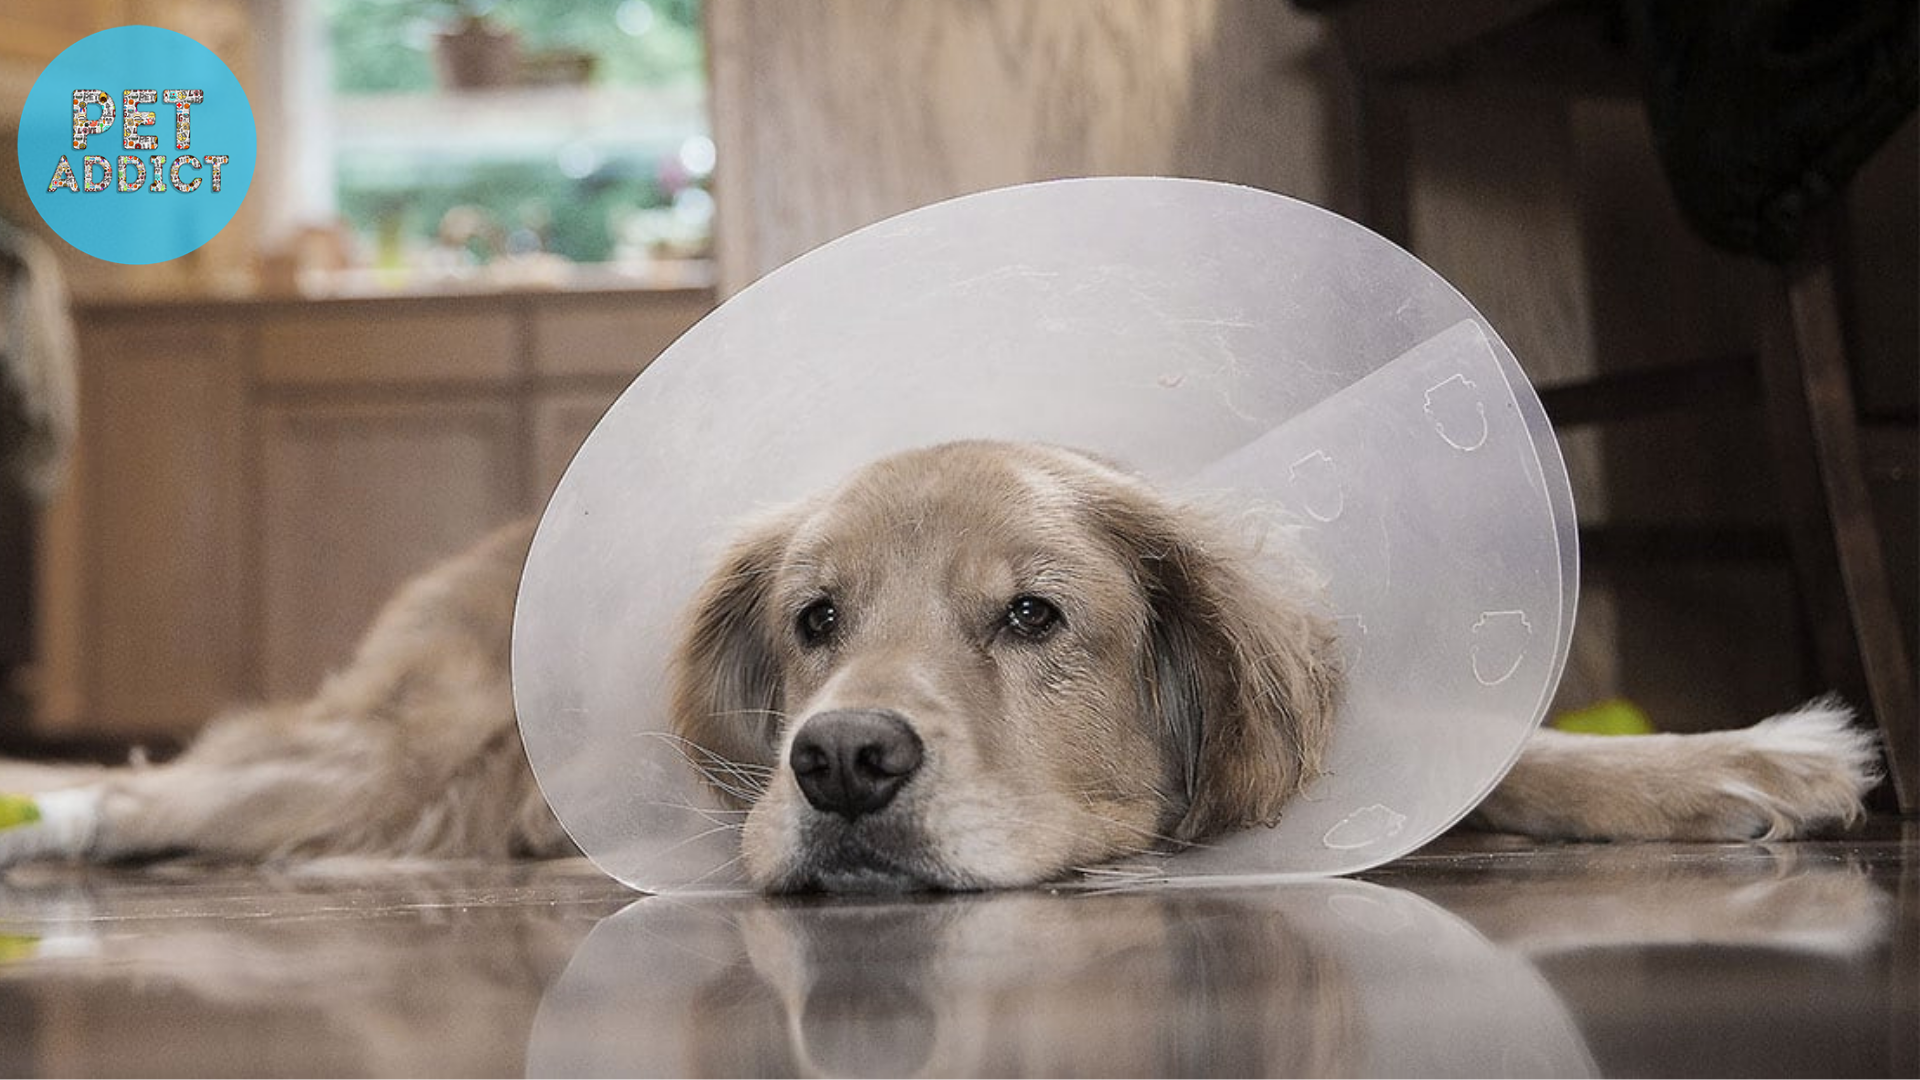 signs your dog needs to be neutered